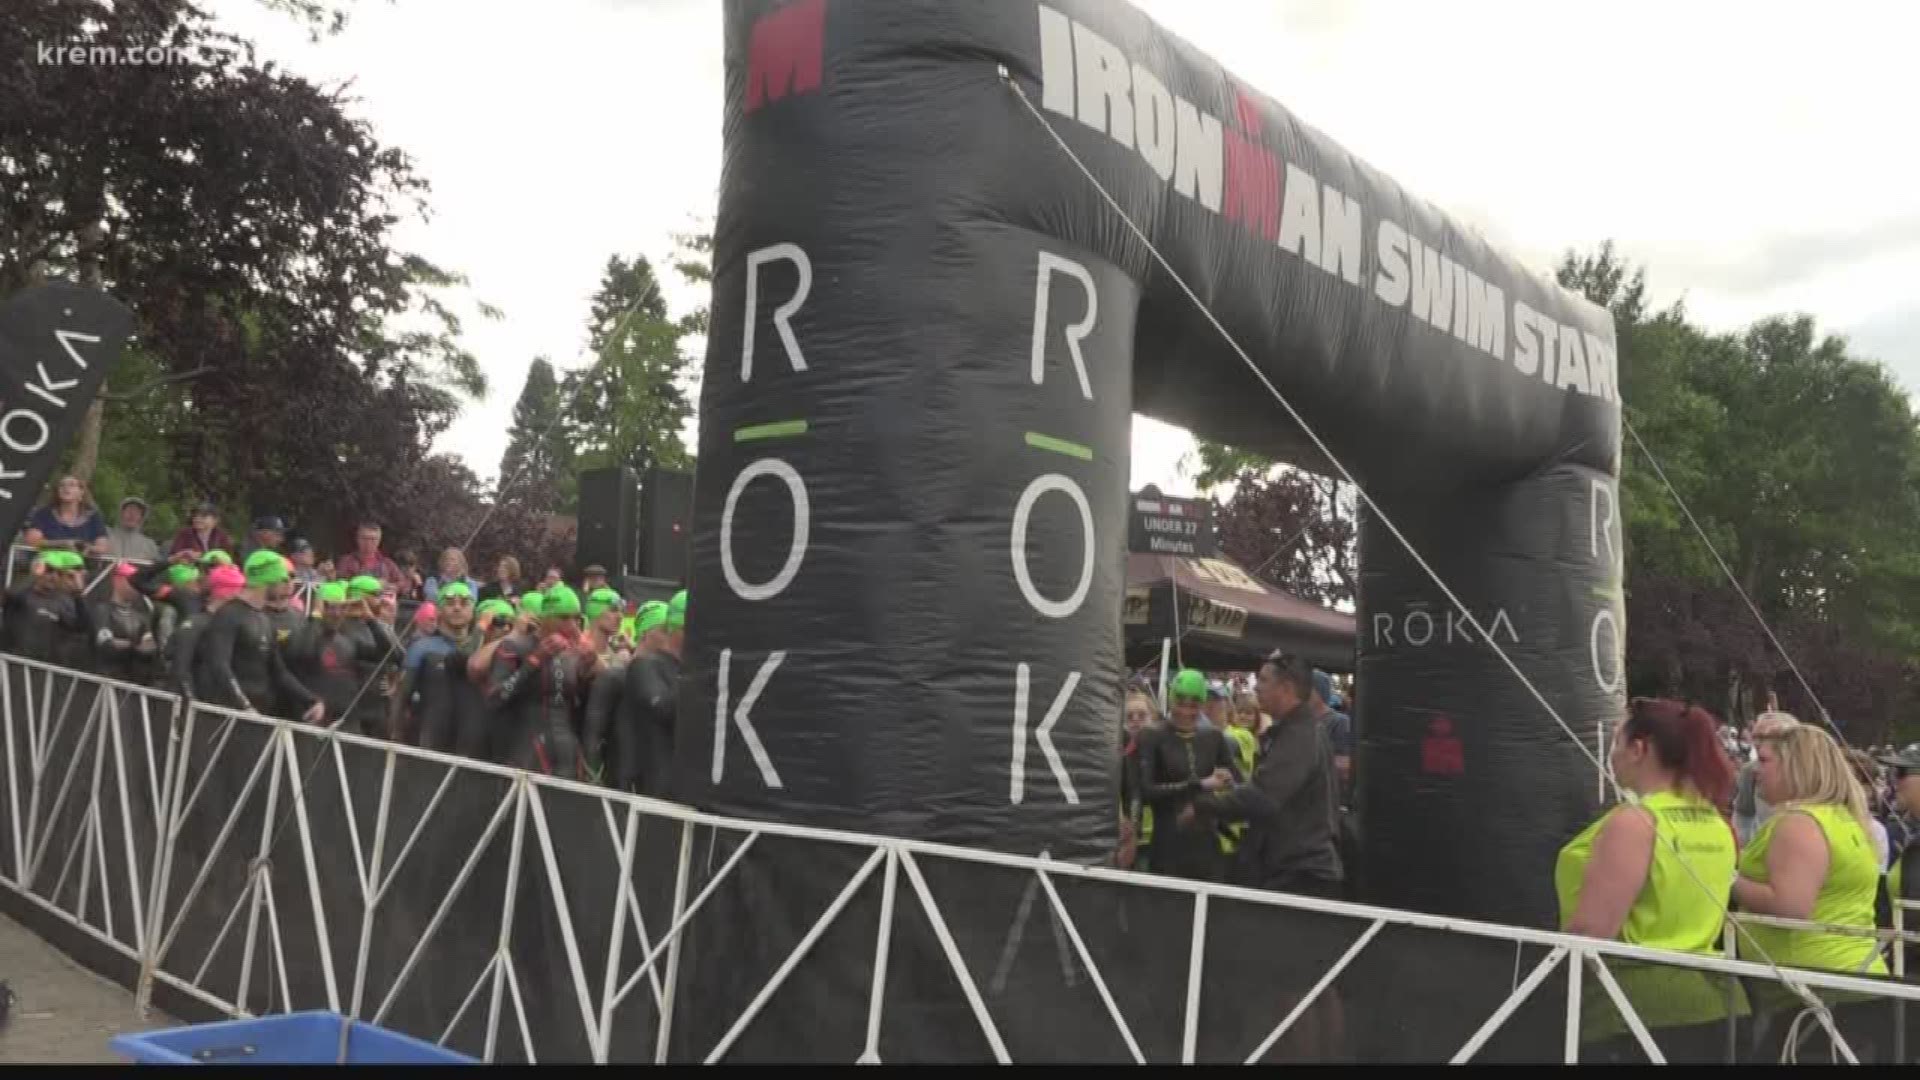 The full Ironman, which sees participants bike, run and swim more than 140 miles, returns to Coeur d'Alene.